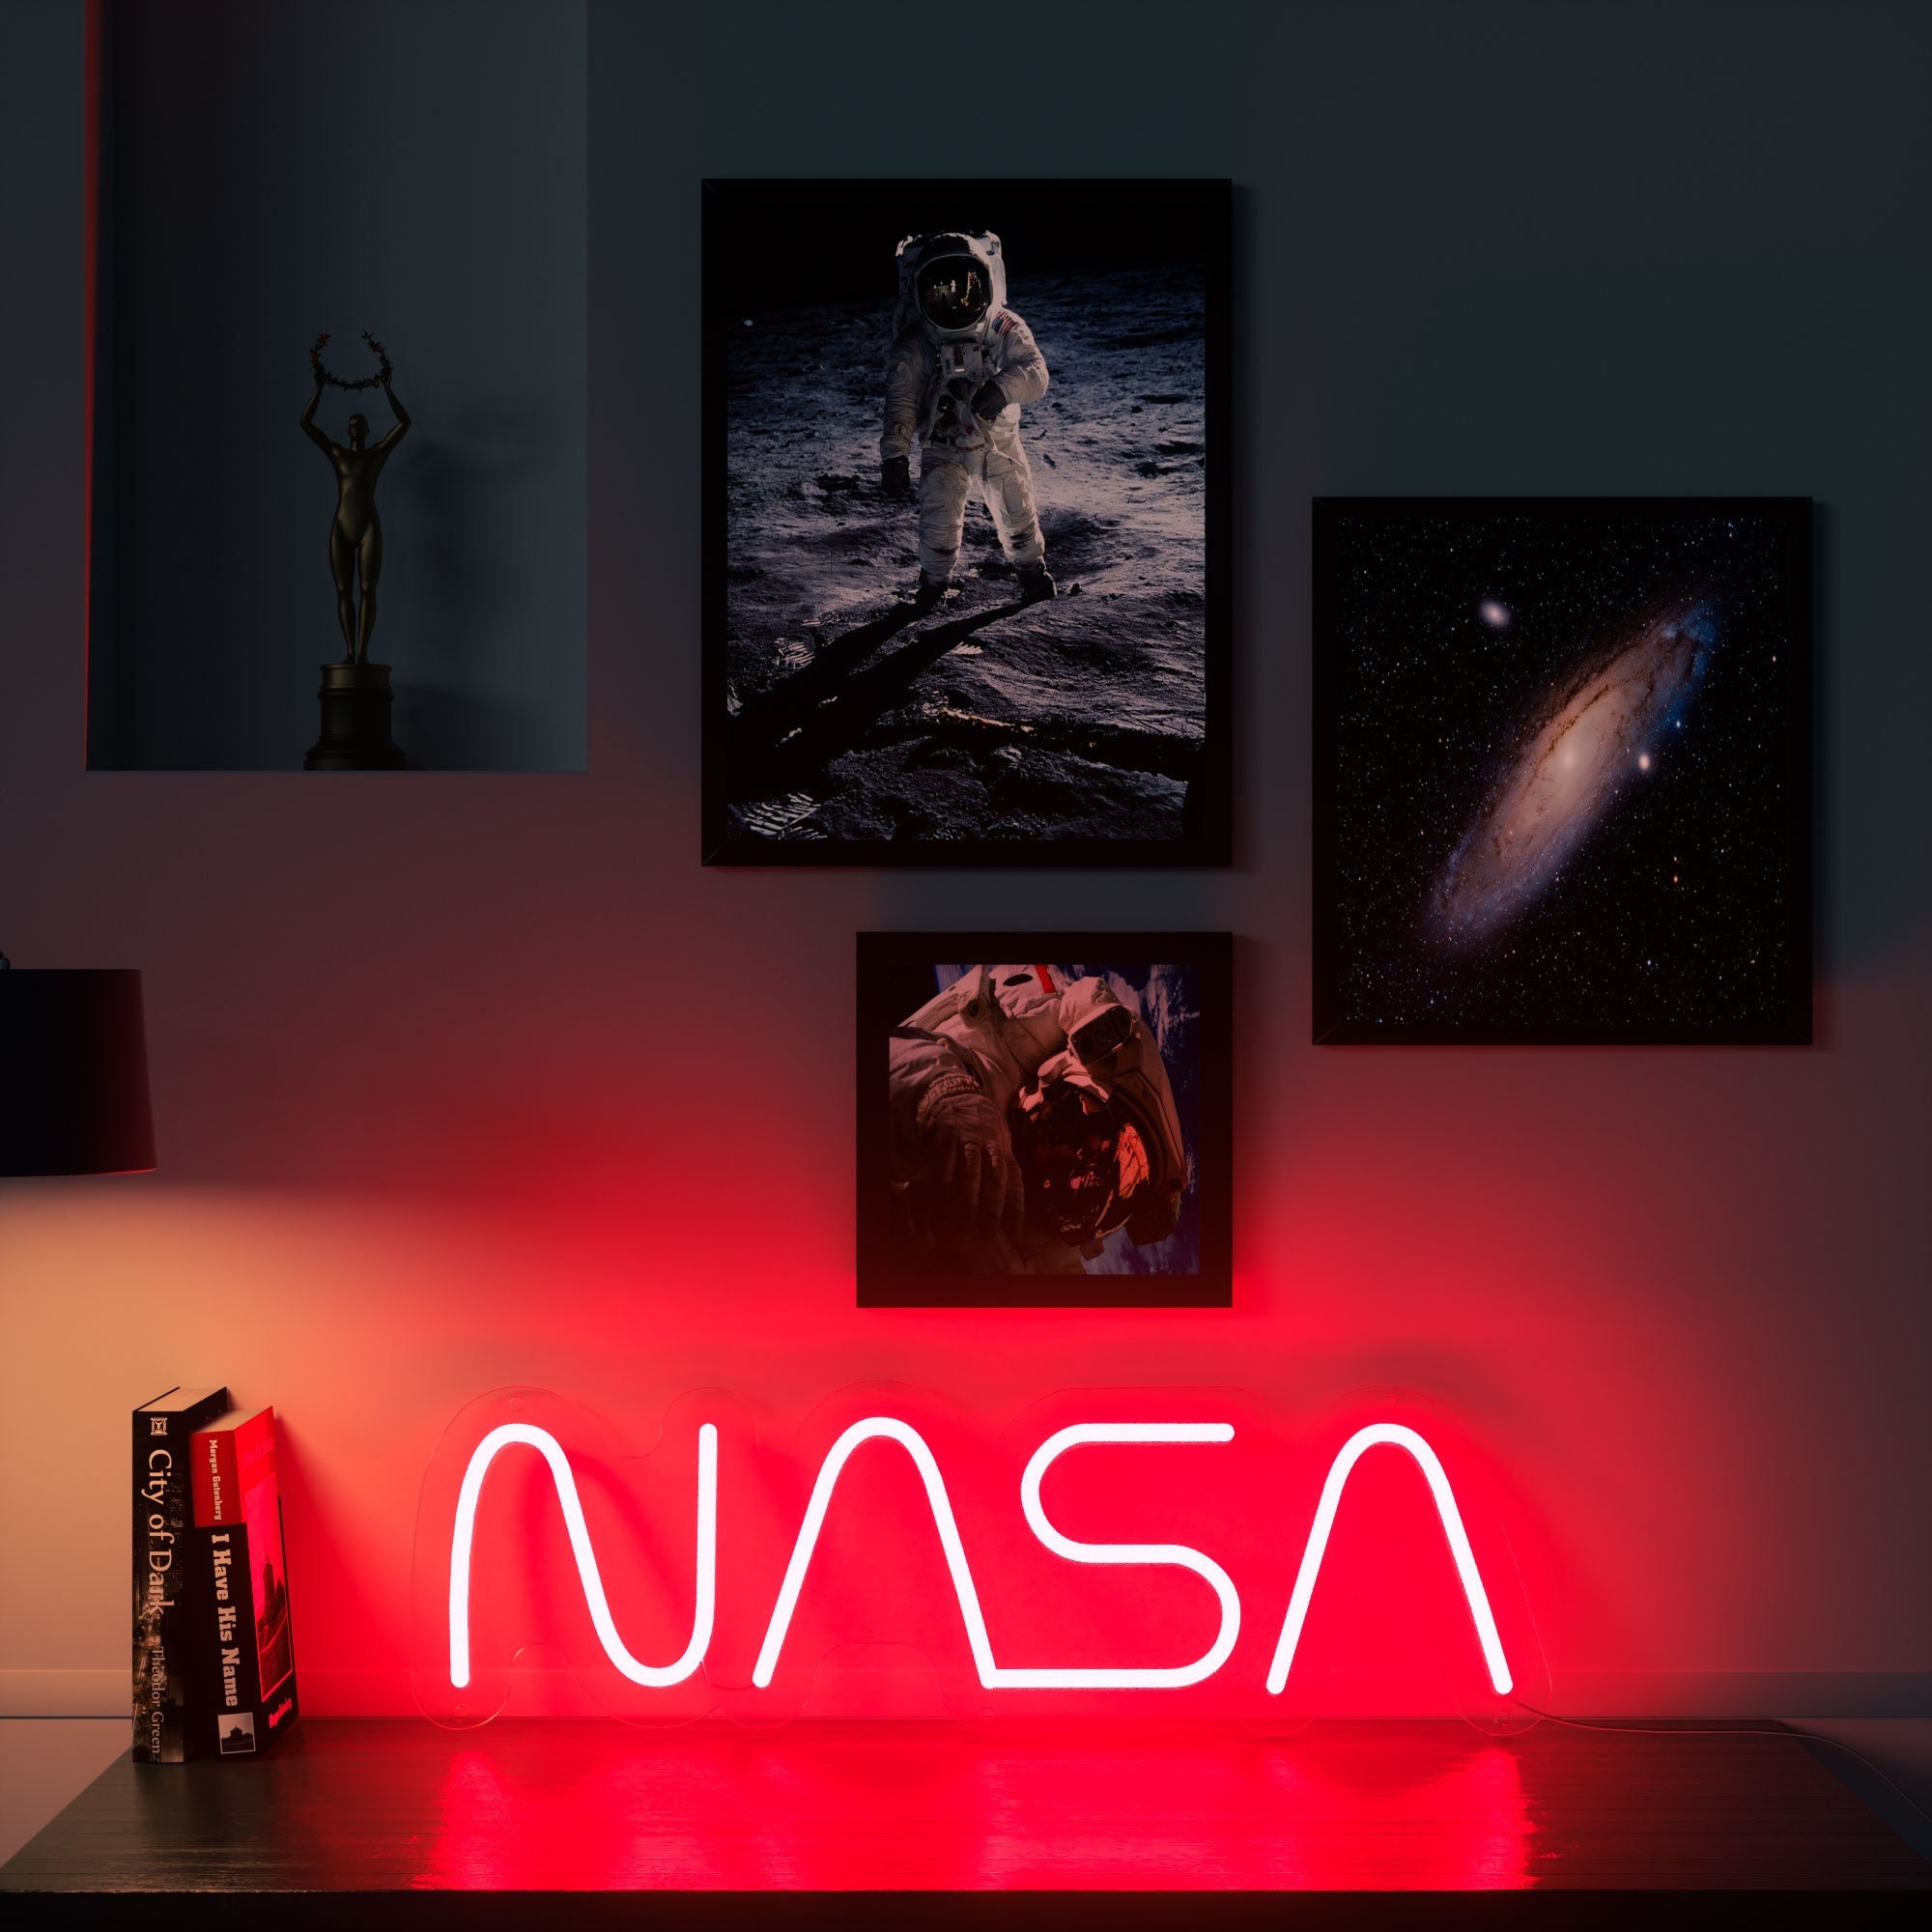 Spaceman Neon Sign Planet Astronaut Neon Sign Led Light - NeonGrand